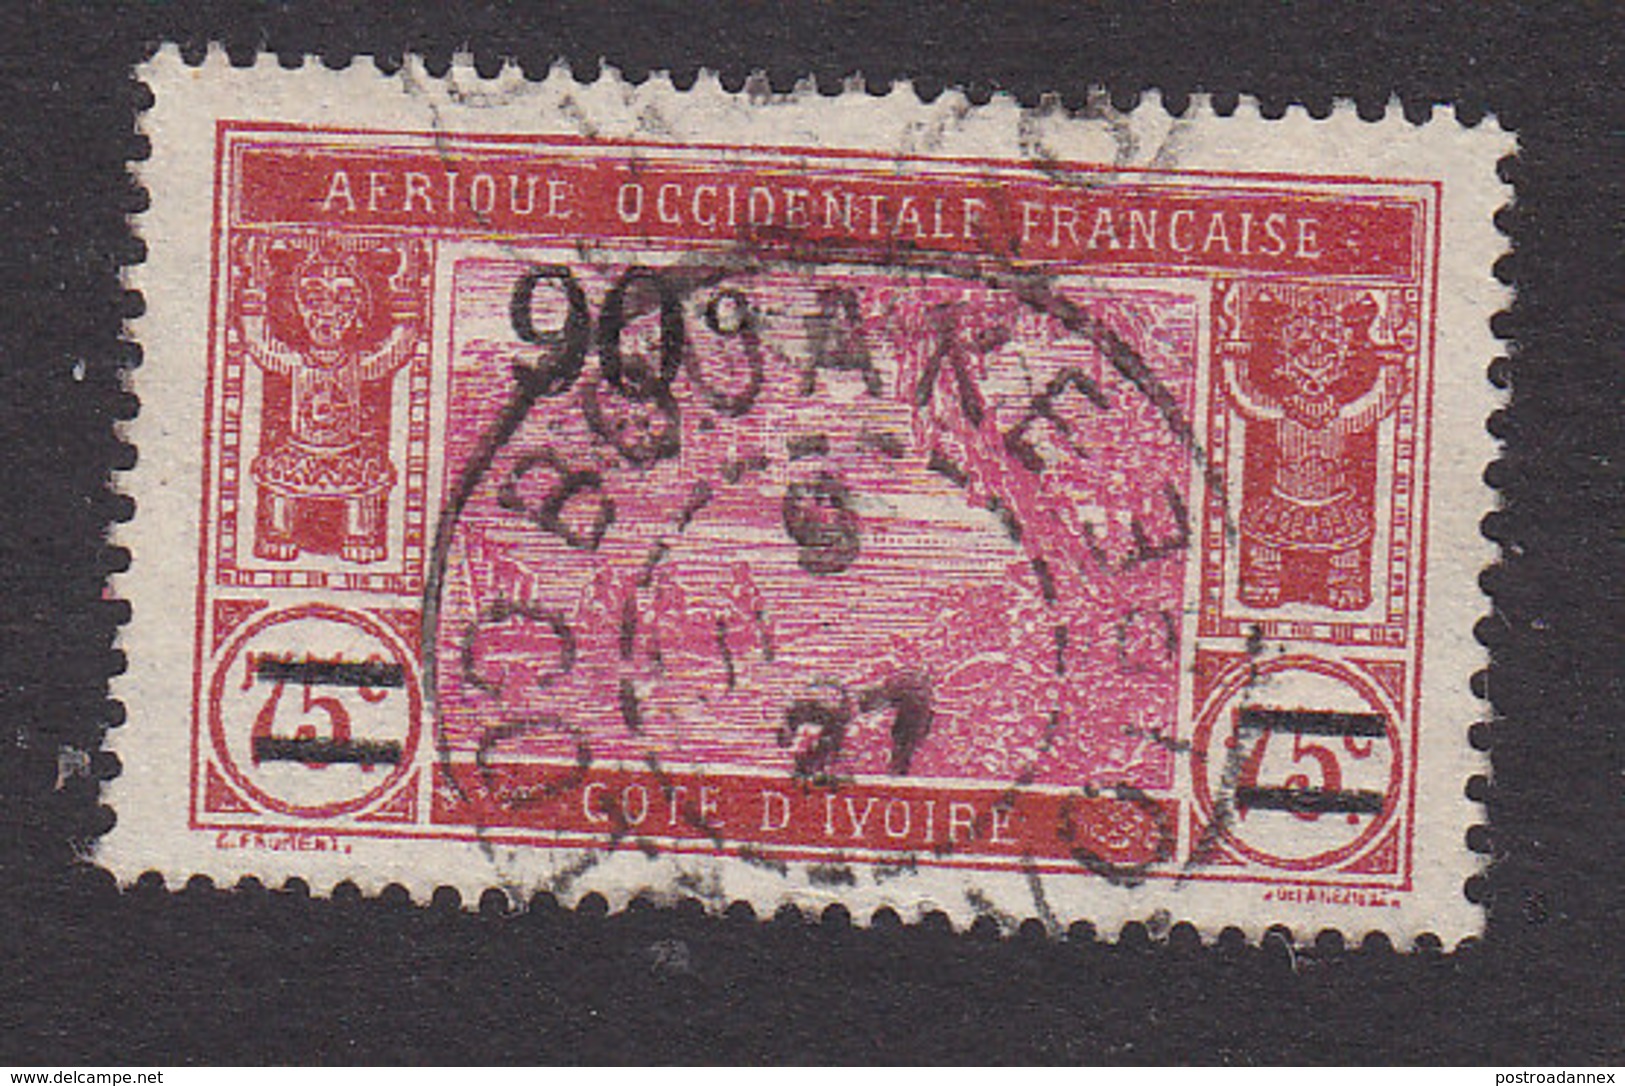 Ivory Coast, Scott #86, Used, River Scene Surcharged, Issued 1924 - Used Stamps